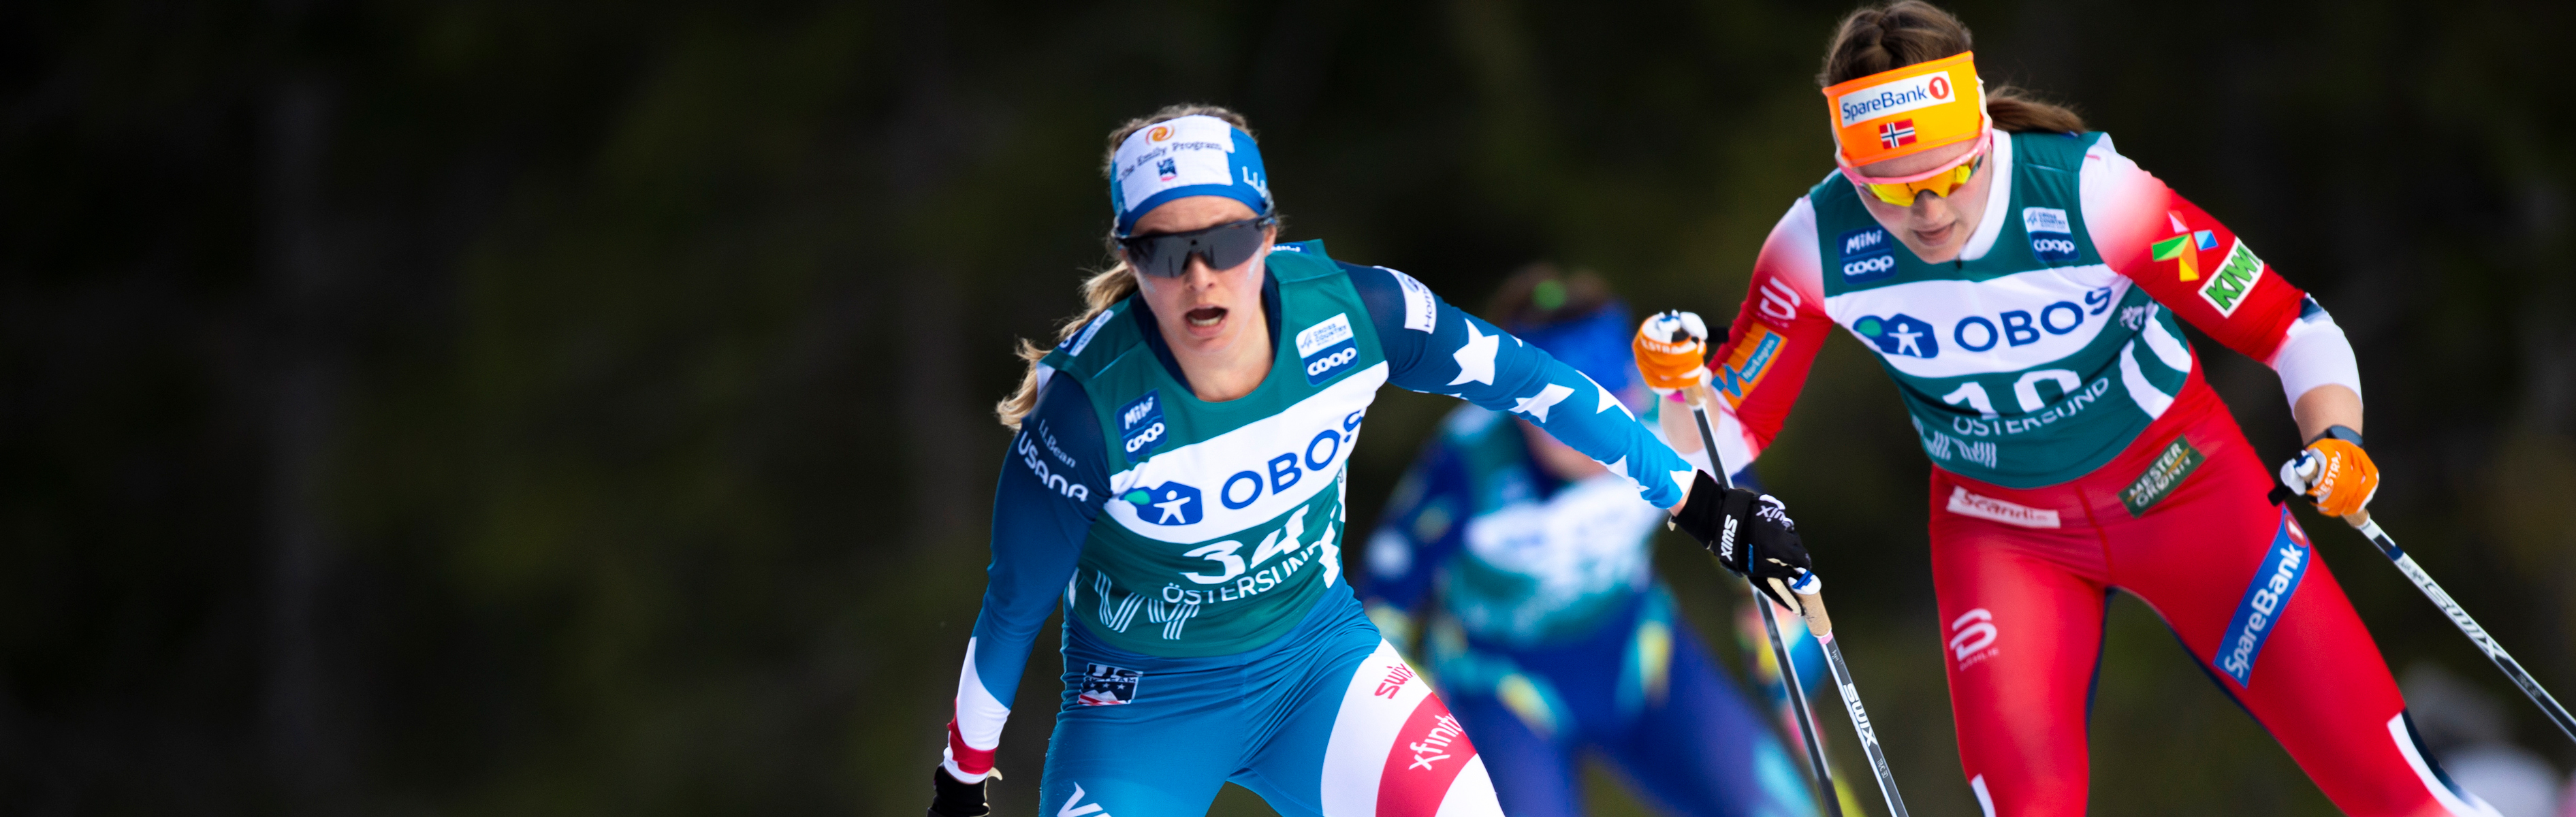 Jessie Diggins finished 11th in Sunday's Stage 2 of the Ski Tour 2020. (www.nordicfocus.com. © Vianney THIBAUT/NordicFocus)